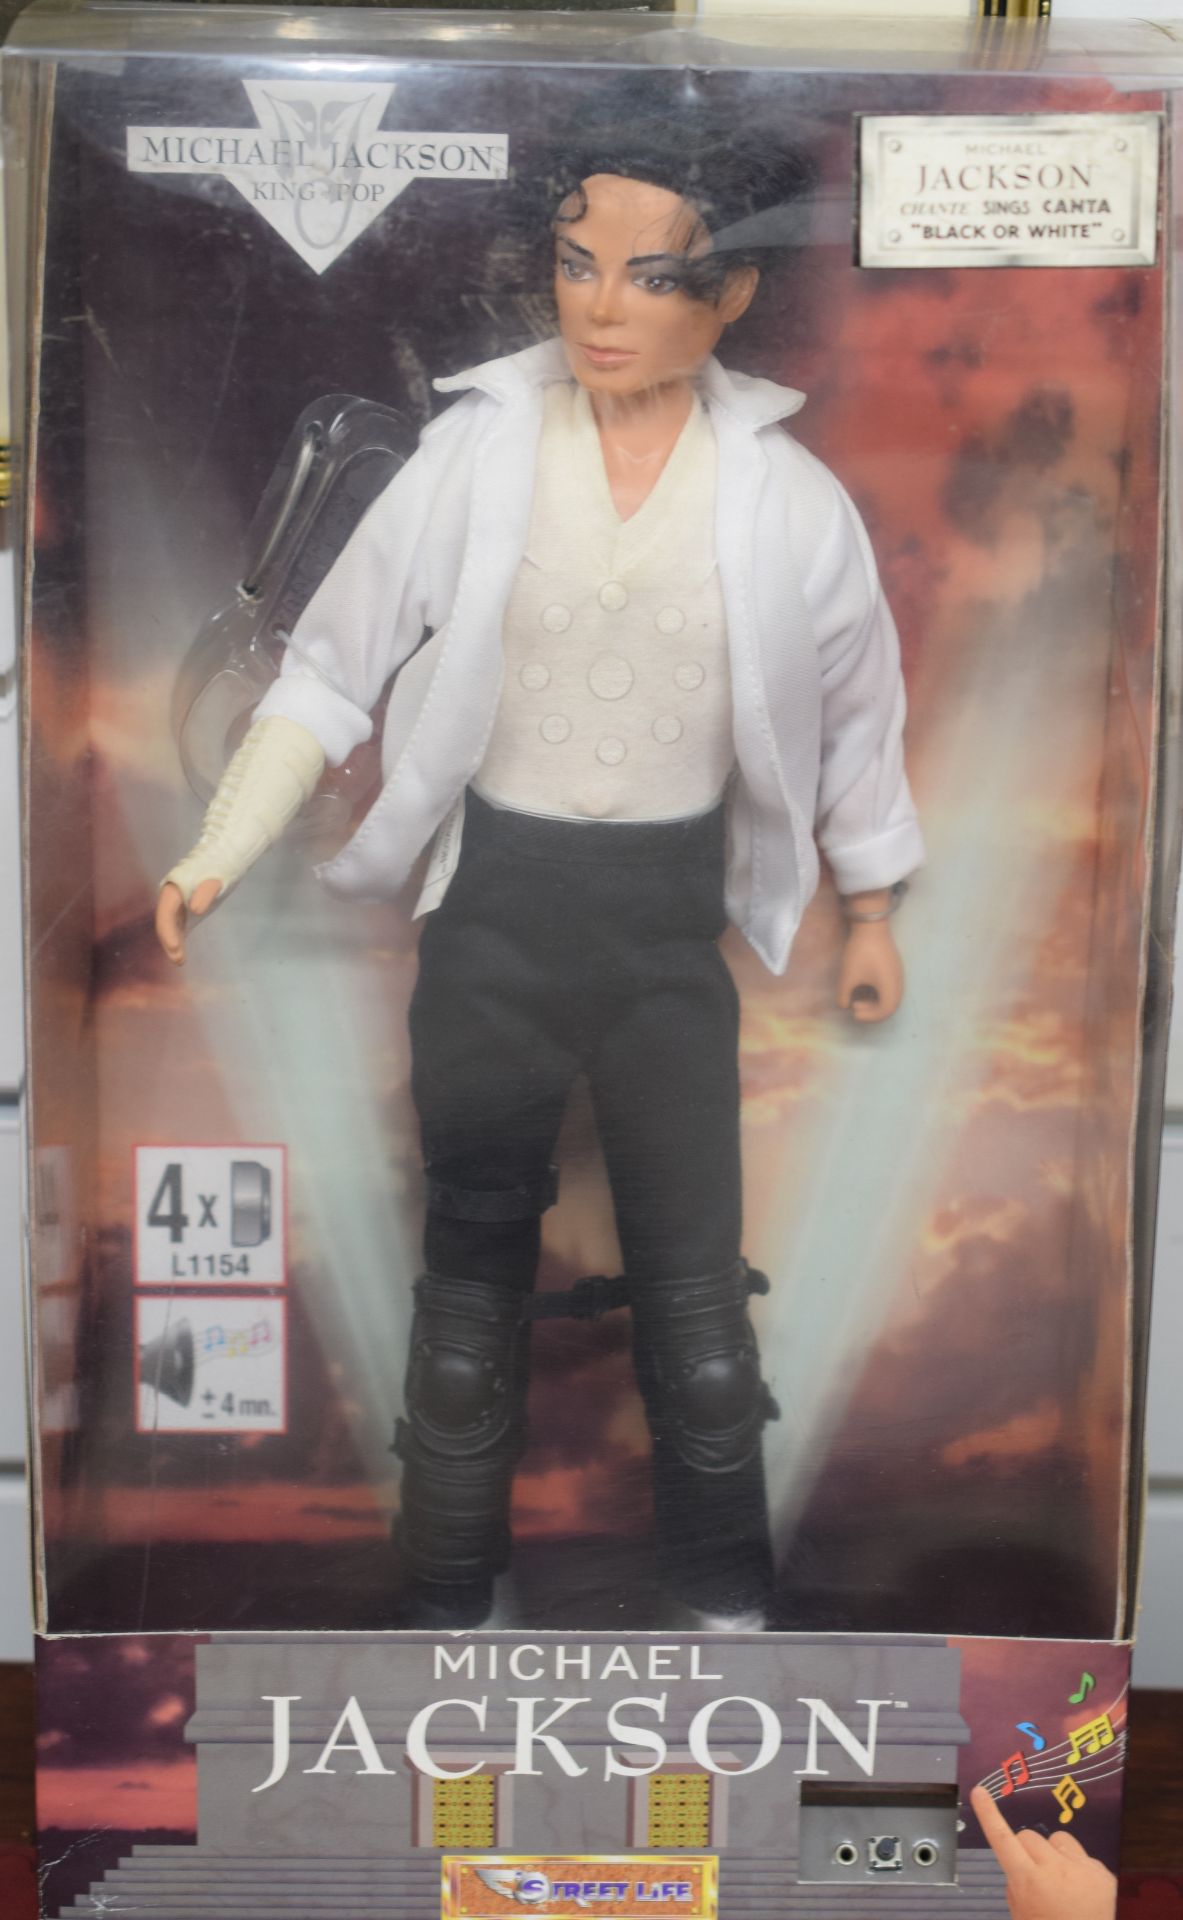 Complete in box is this Limited Edition Michael Jackson Singing Doll